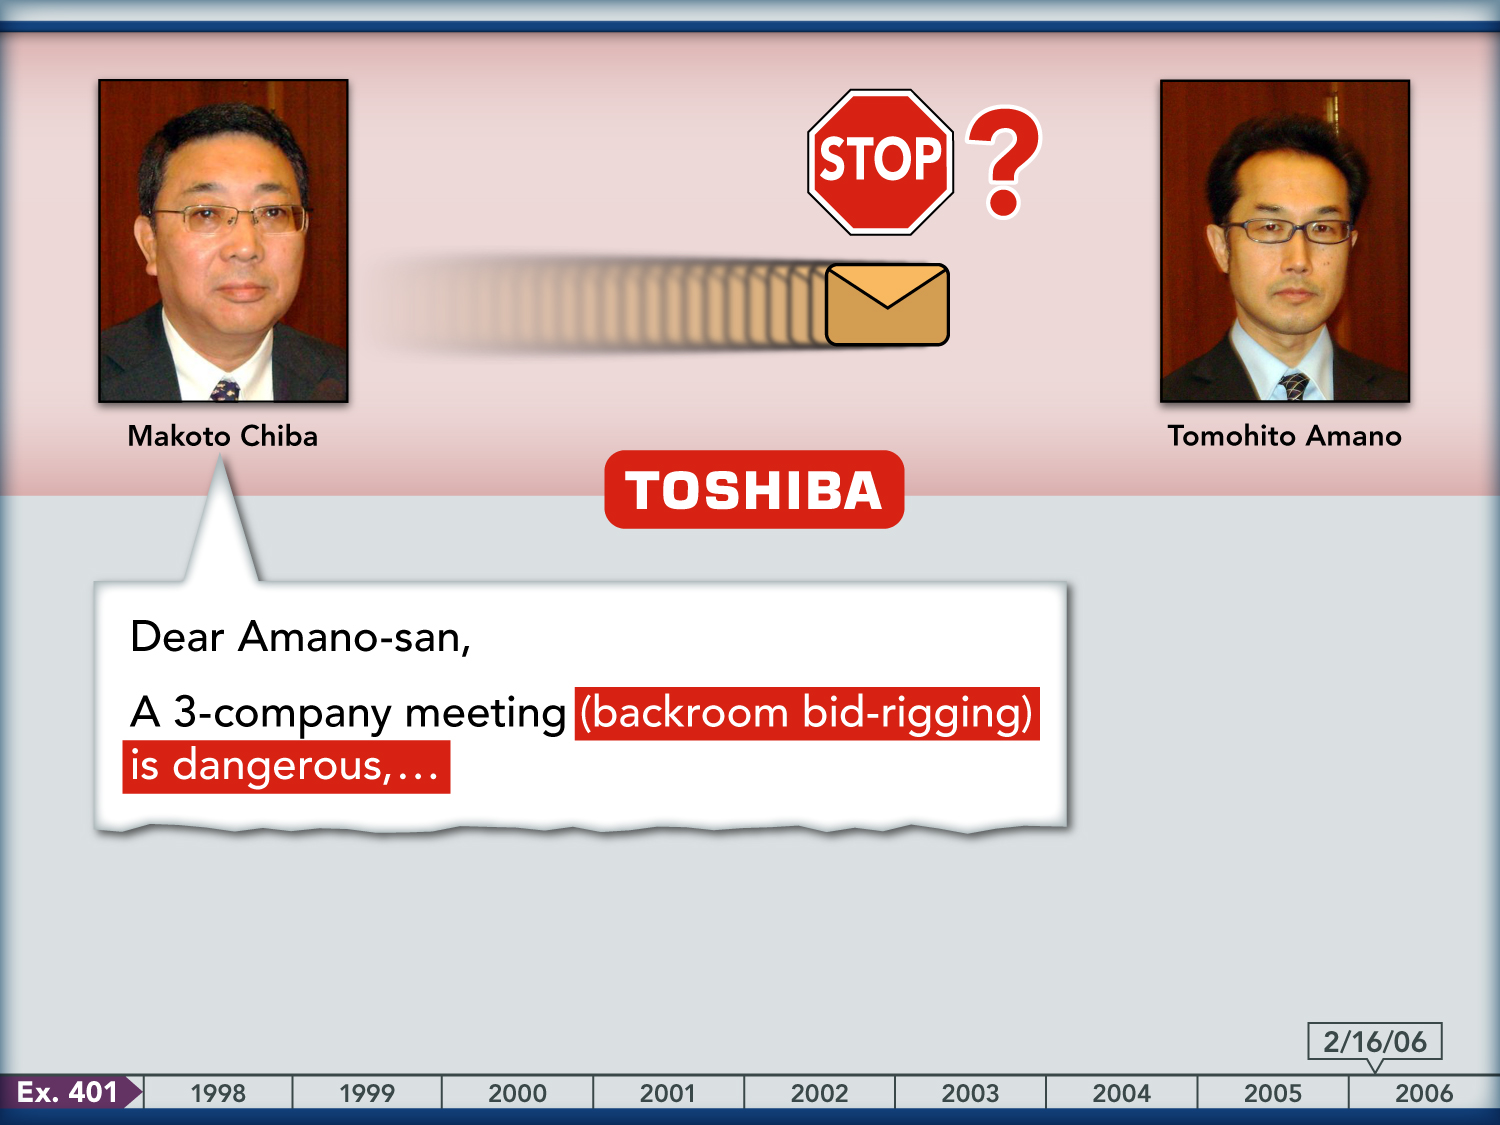 2 photos of Asian men, each on opposite sides of slide, word bubble pointing to Chiba with snippet of a letter